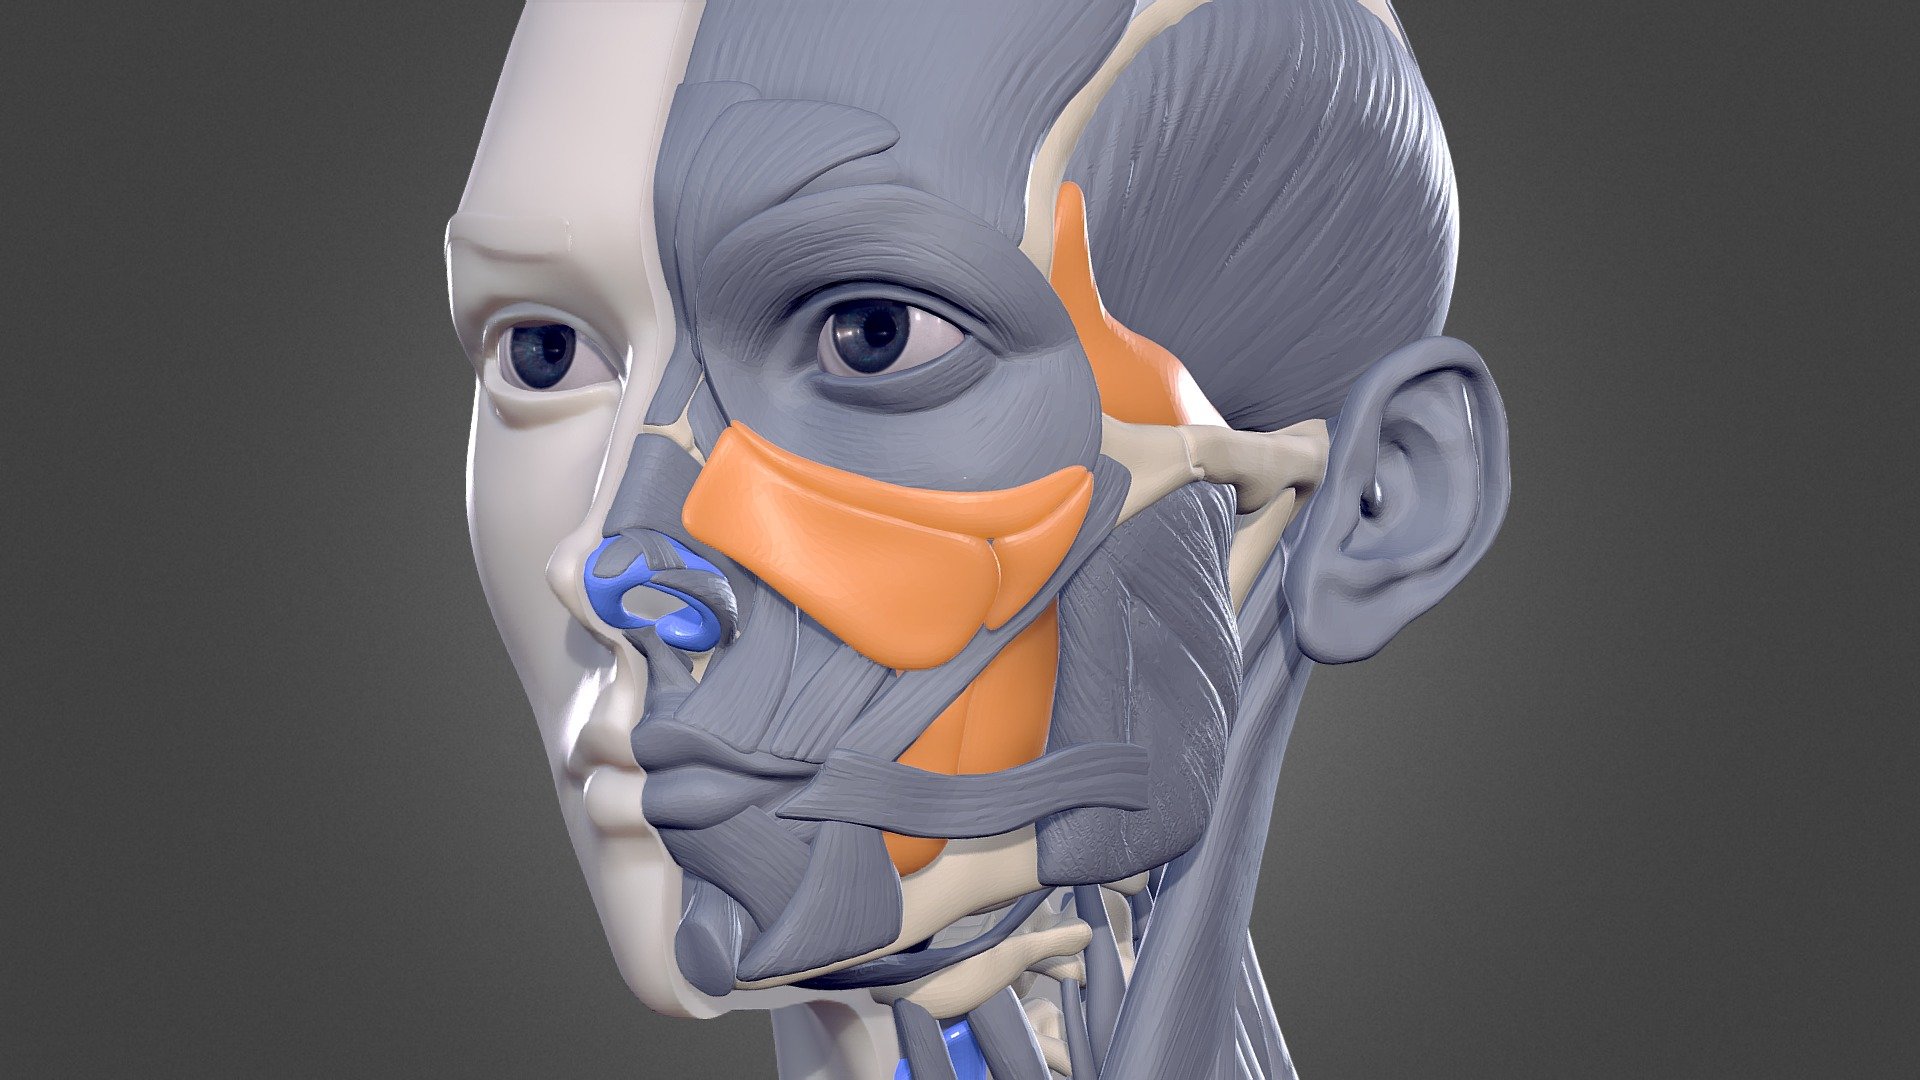 Hello there,
This project was meant to study anatomy of the human head, while creating something pretty with it, I've learned so much in the process.
Want to see this model in X-Ray? check: https://www.artstation.com/artwork/28BQOB
Hope you like it - Female Bust - Human Anatomy Study - 3D model by Hossam (@hossam.ahmed) 3d model